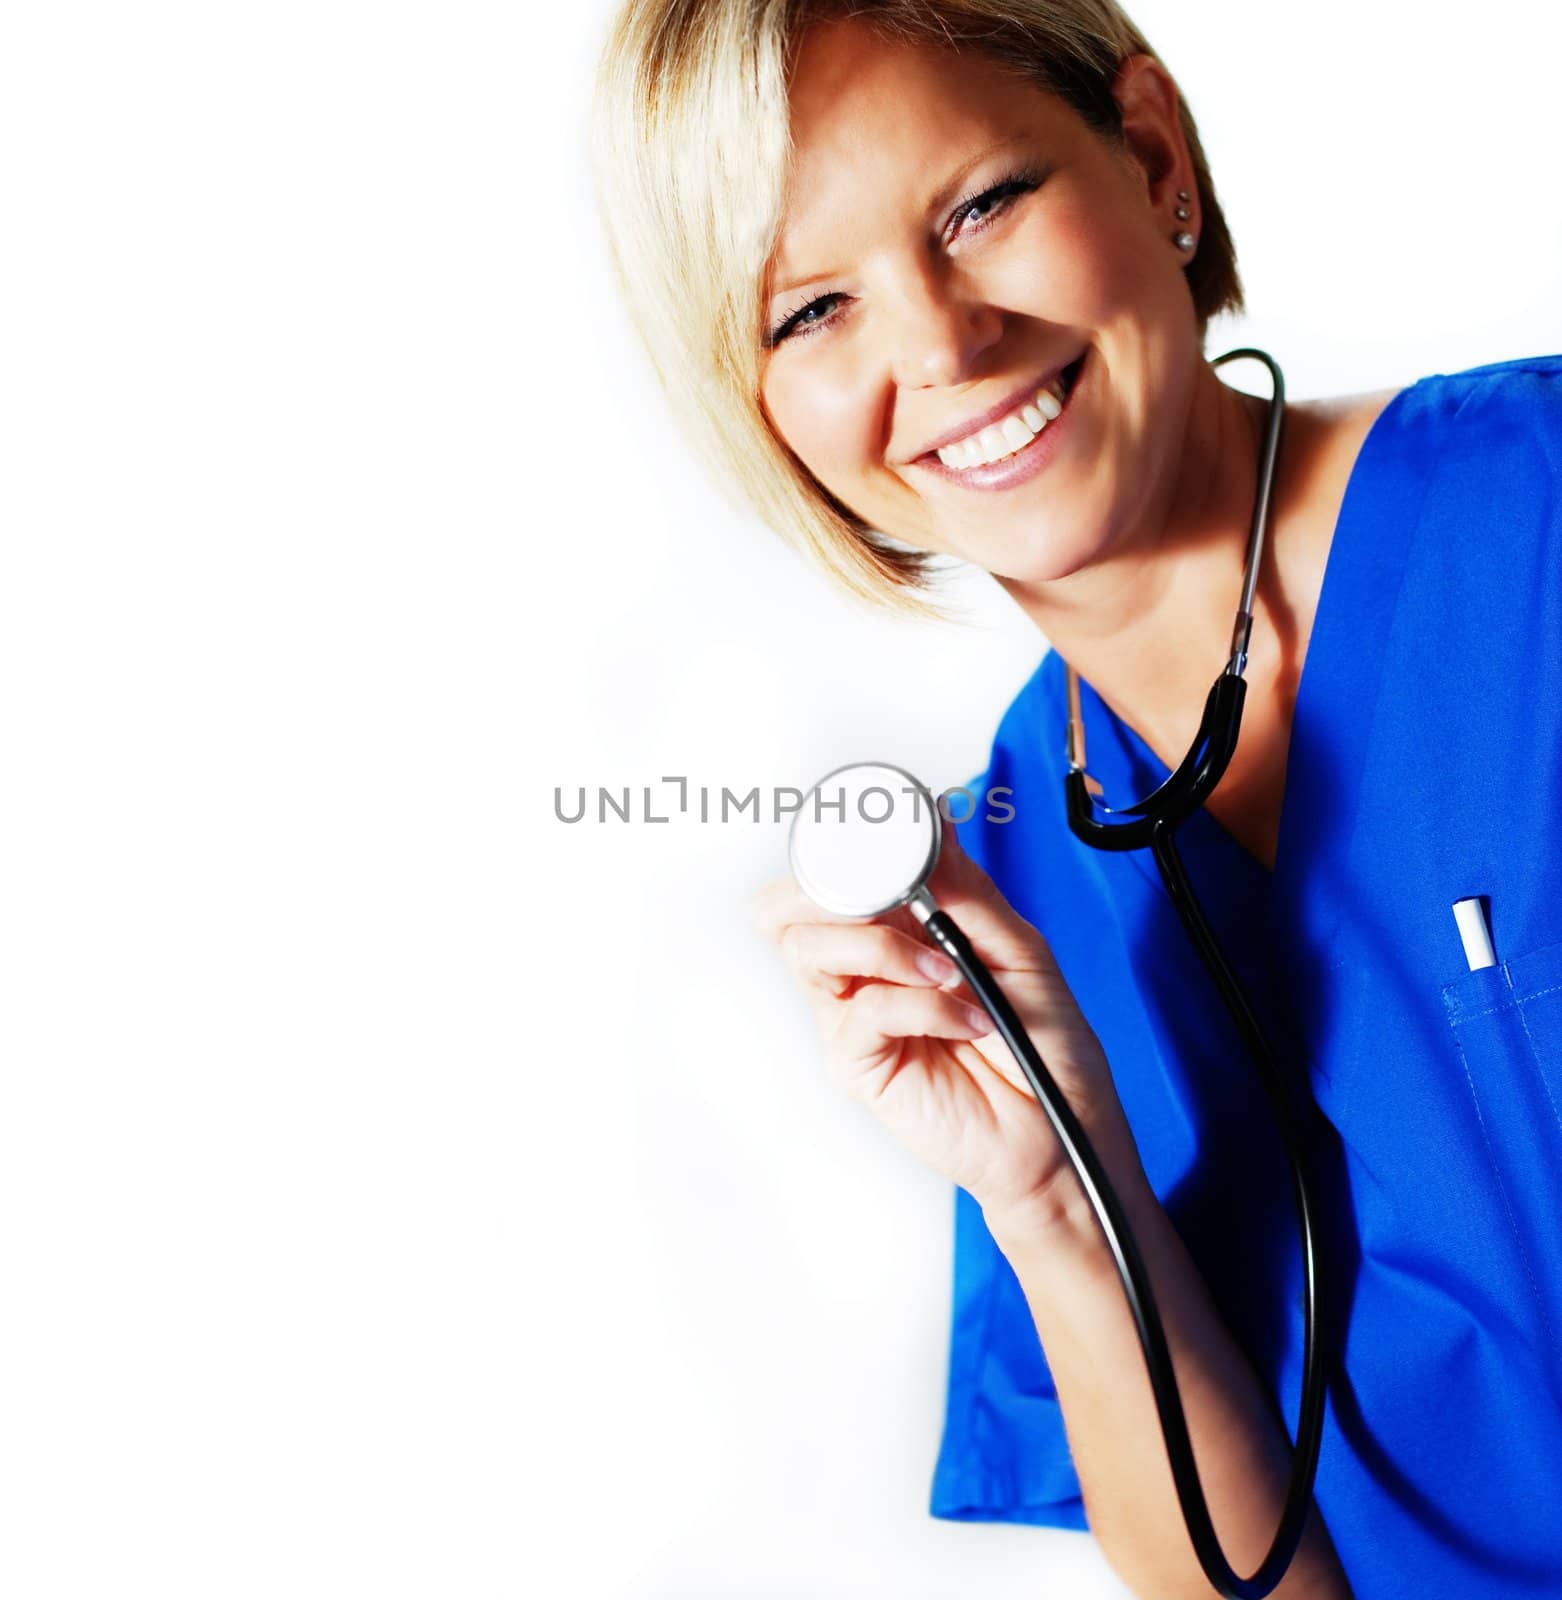 Mature nurse in blue scrubs with stethoscope.